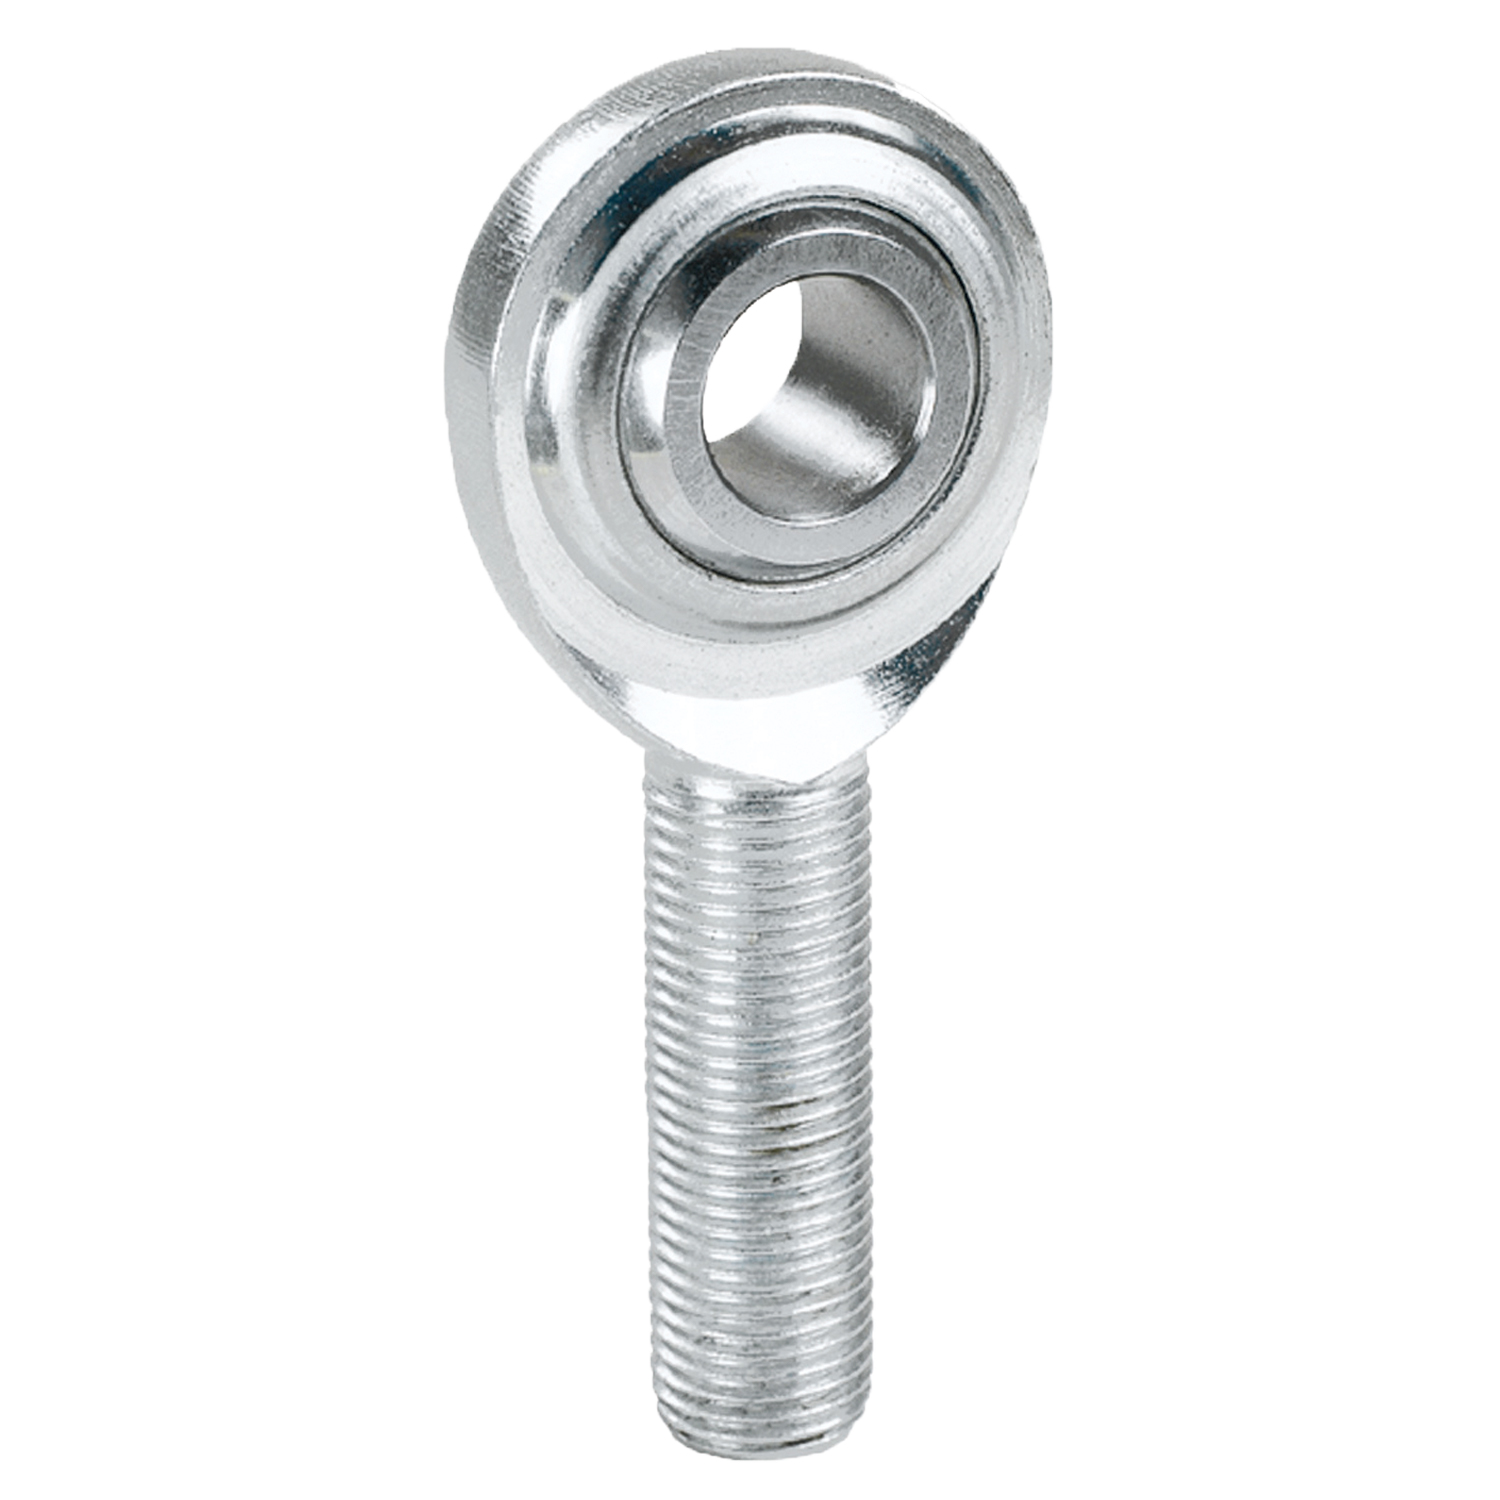 MGM-T Series Stainless Steel Rod End Hole I.D.: 12 mm